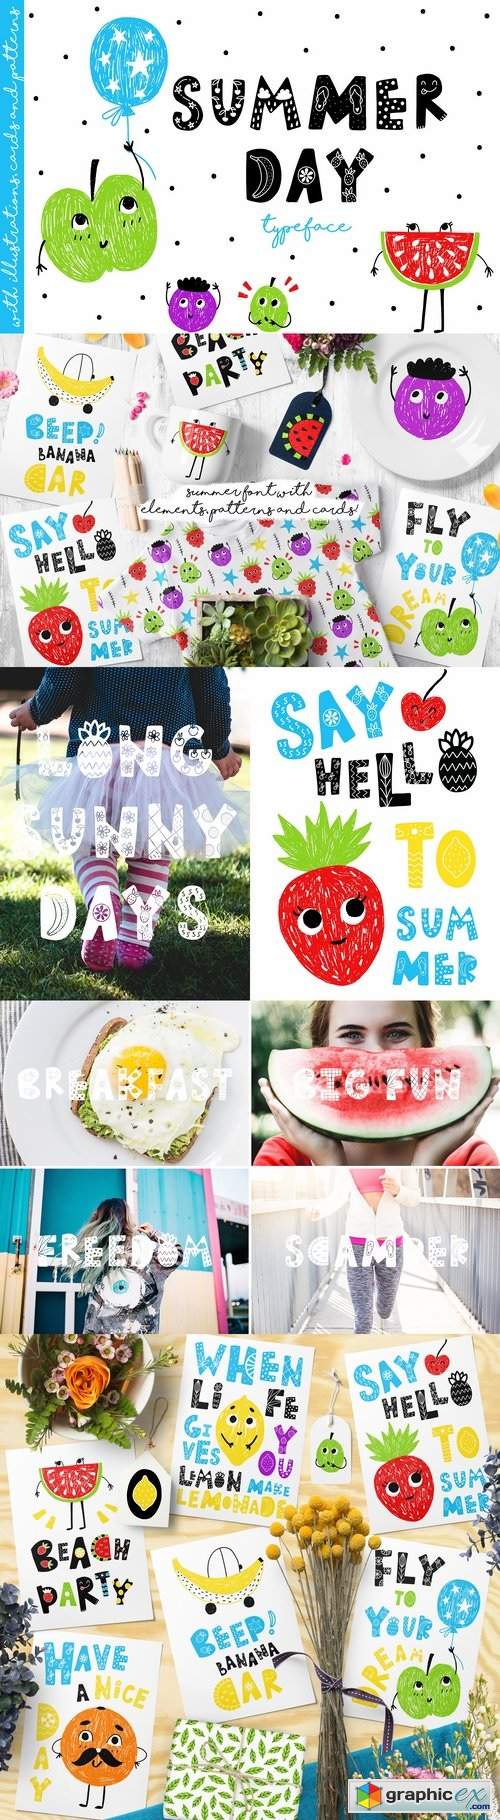 Summer Day Typeface with Clipart!